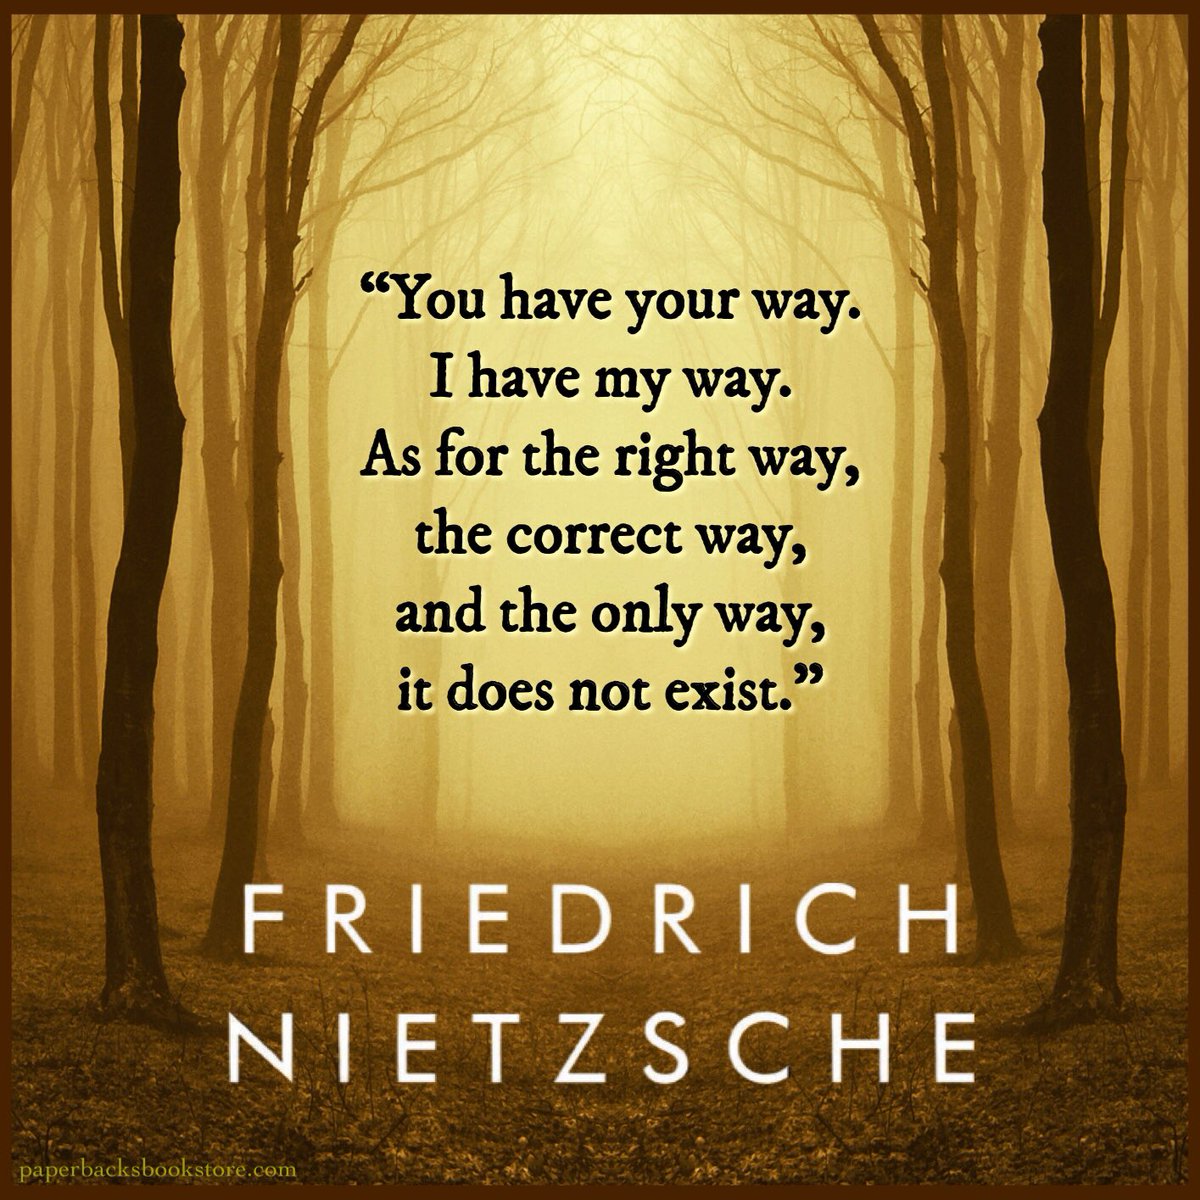 🖤
“You have your way. I have my way. As for the right way, the correct way, and the only way, it does not exist.” ~Friedrich Nietzsche

#FriedrichNietzsche #Nietzsche #philosopher #therightway #thecorrectway #theonlyway #literature #books #booksandart  #oldbooks #usedbookstore